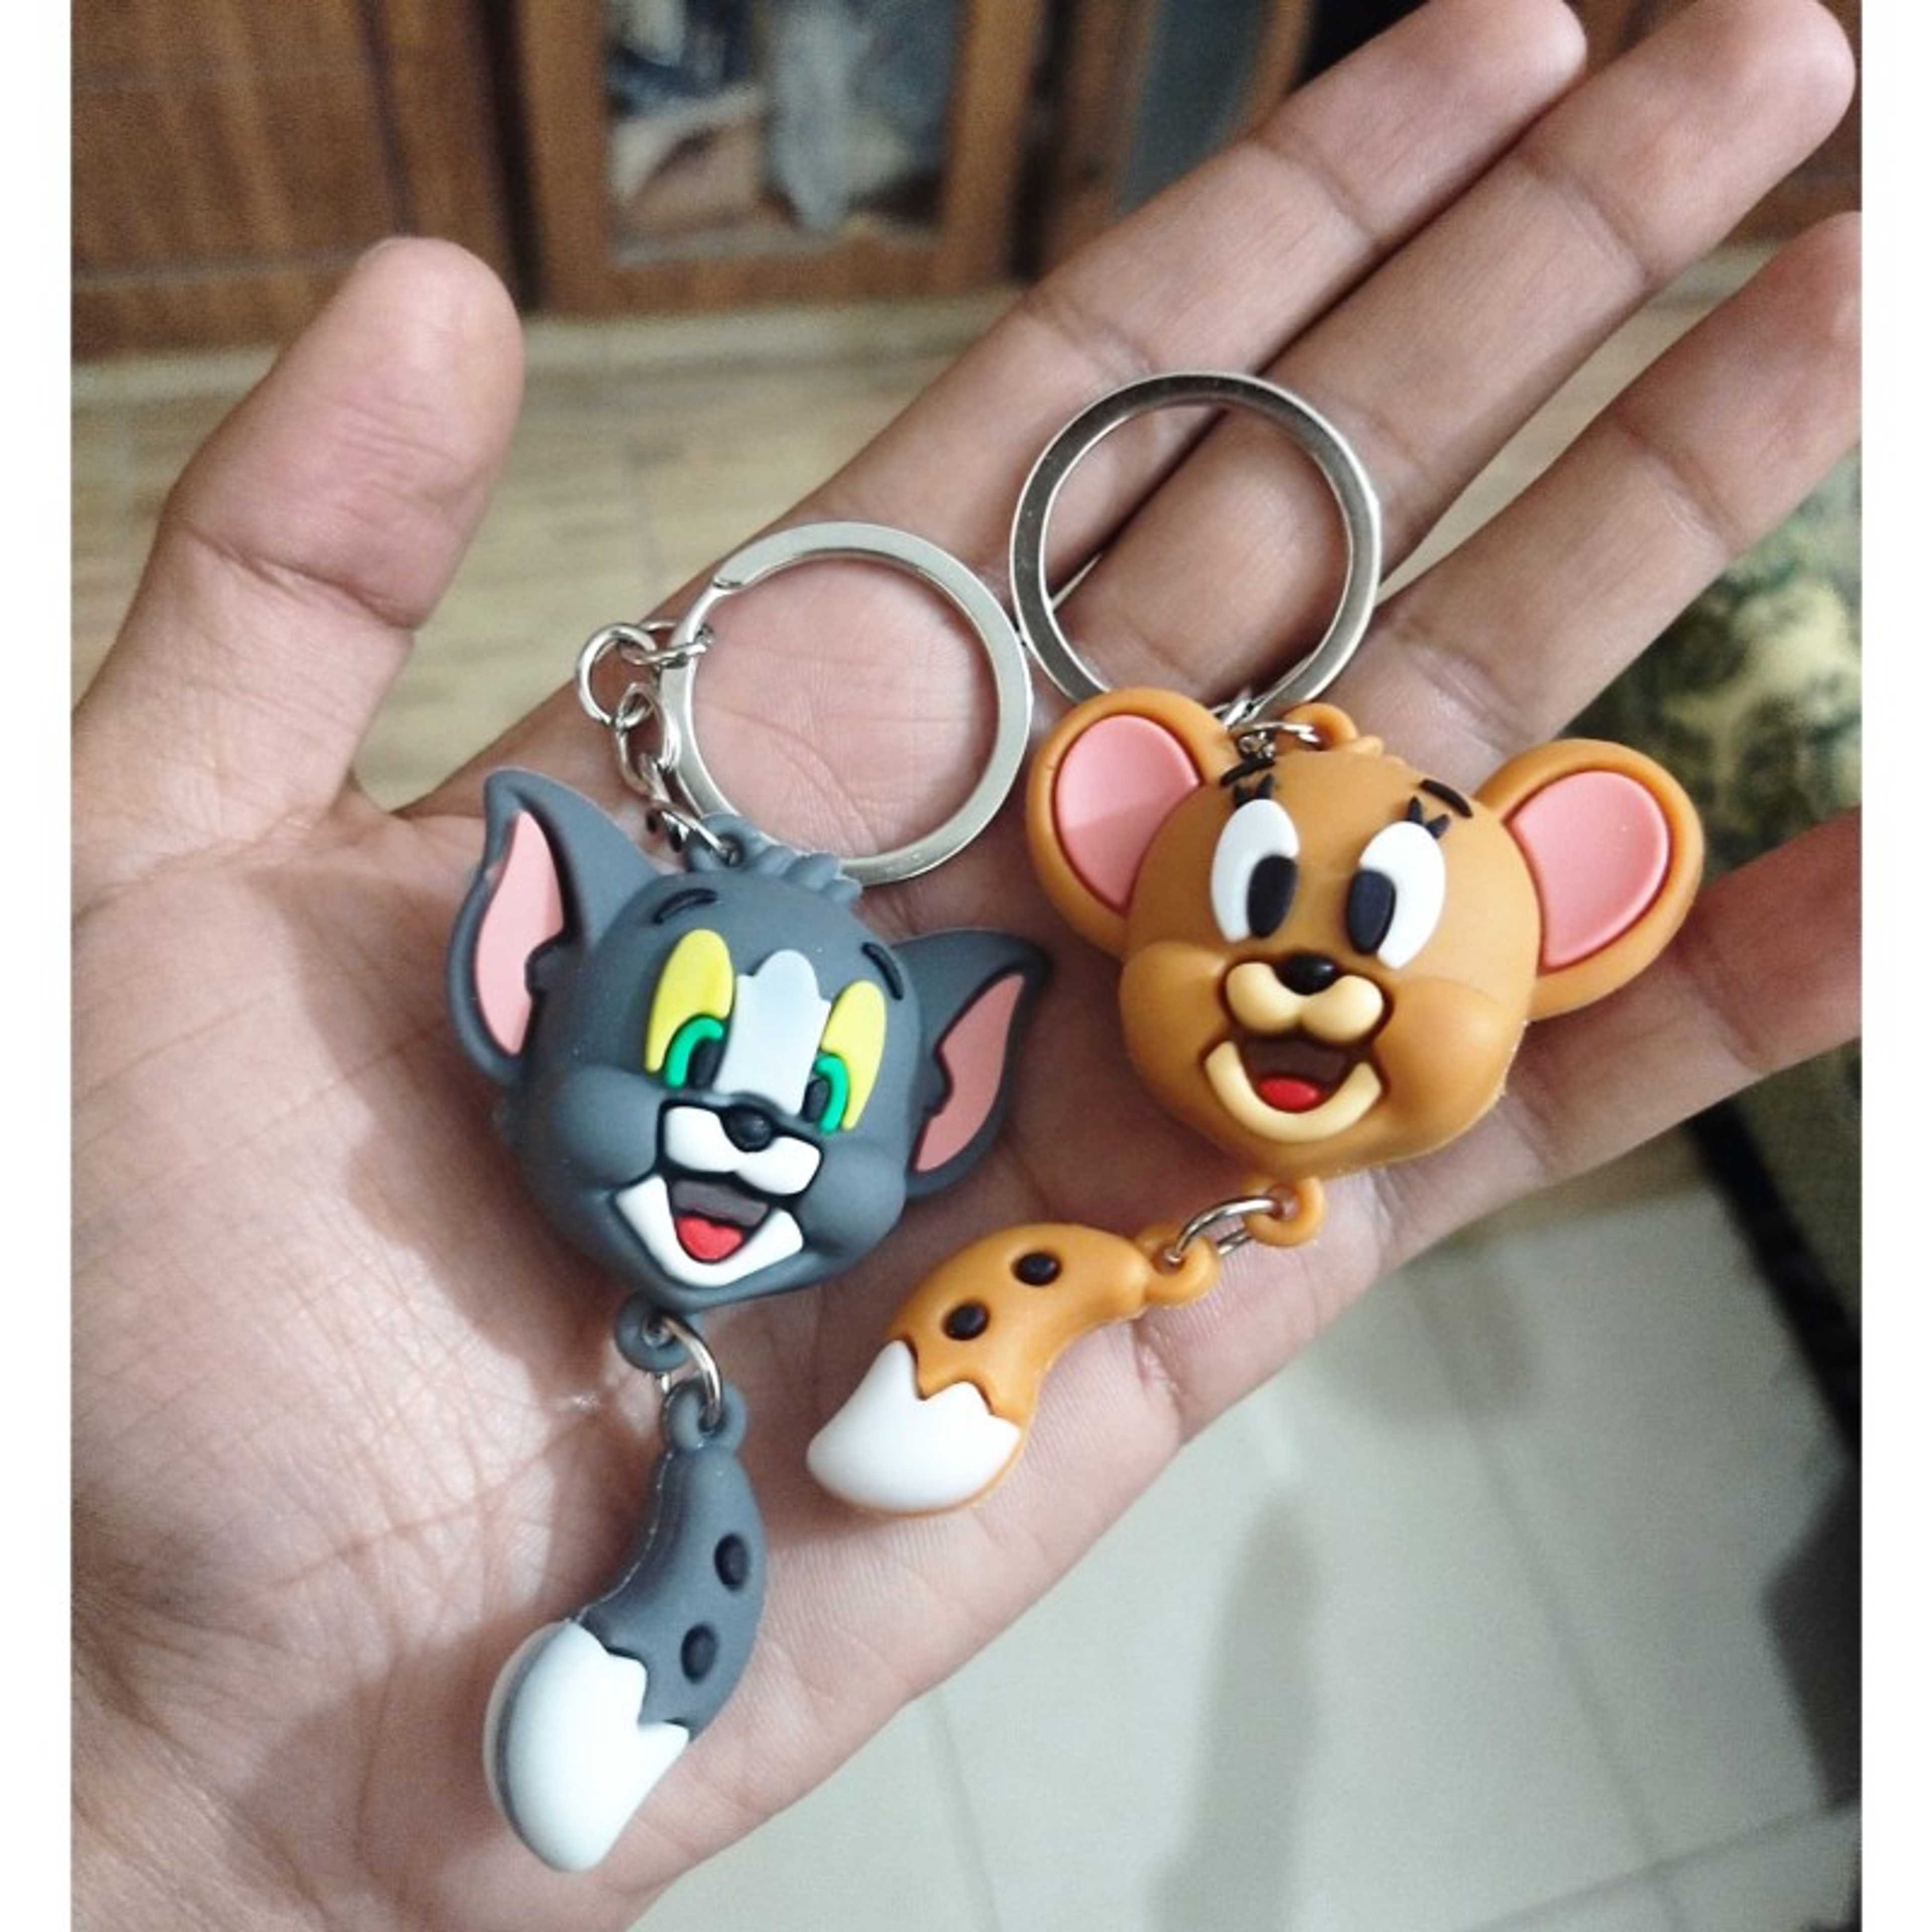 PACK OF 2 TOM AND JERRY SOFT SILCONE MADE KEYCHAIN FOR BOYS AND GIRLS SOFT SILICONE RUBBER CARTOON ANIME KEYCHAIN   Tom and Jerry Ornament KEYCHAIN Birthday Gifts